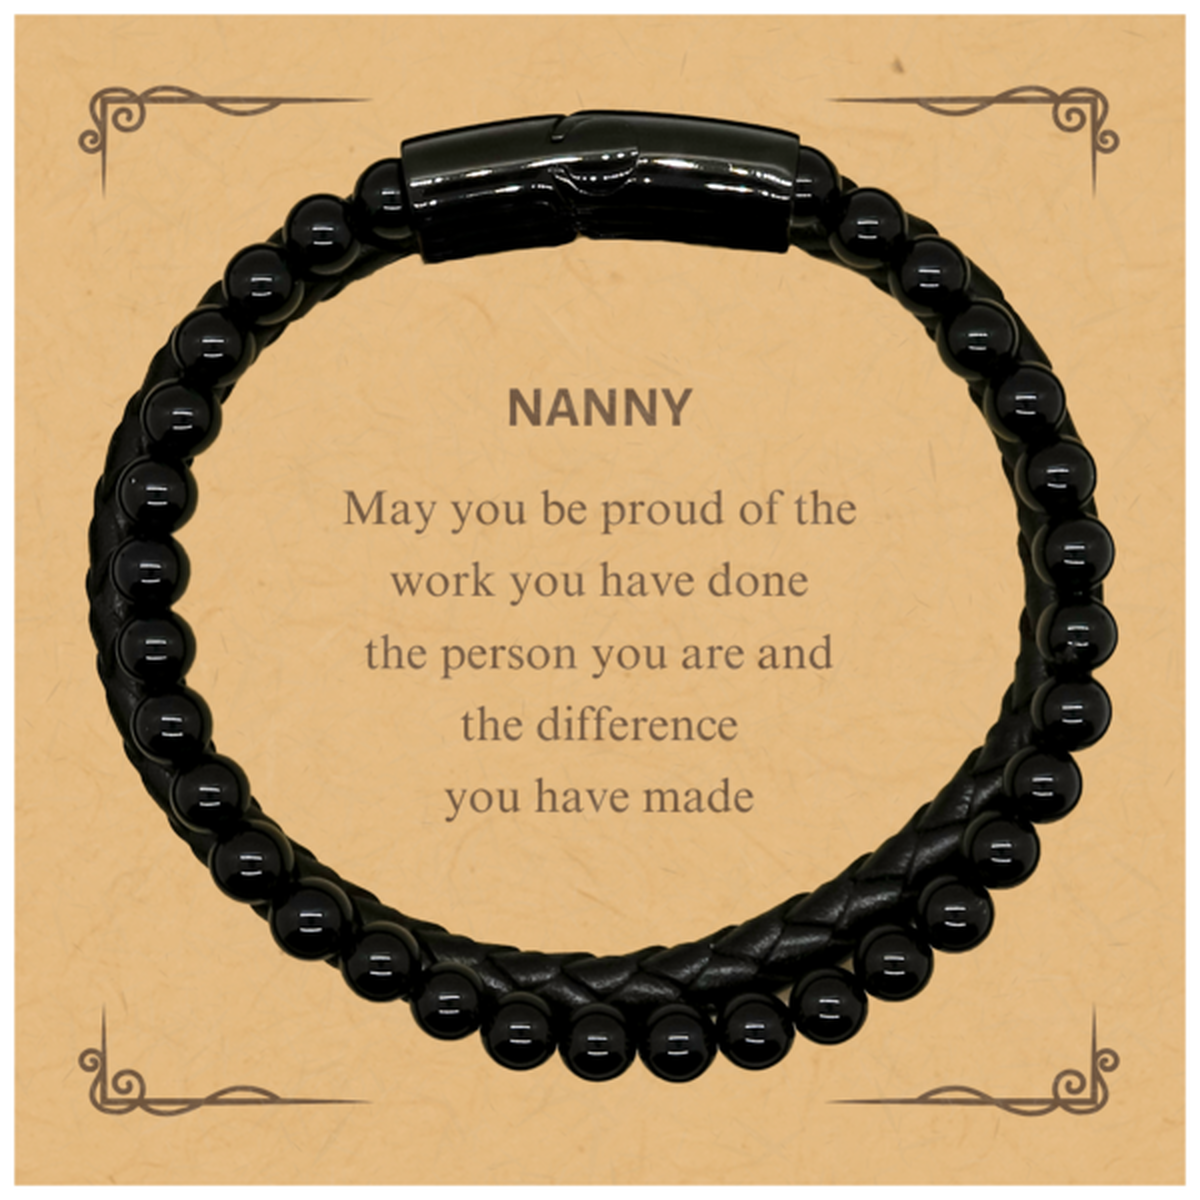 Nanny May you be proud of the work you have done, Retirement Nanny Stone Leather Bracelets for Colleague Appreciation Gifts Amazing for Nanny